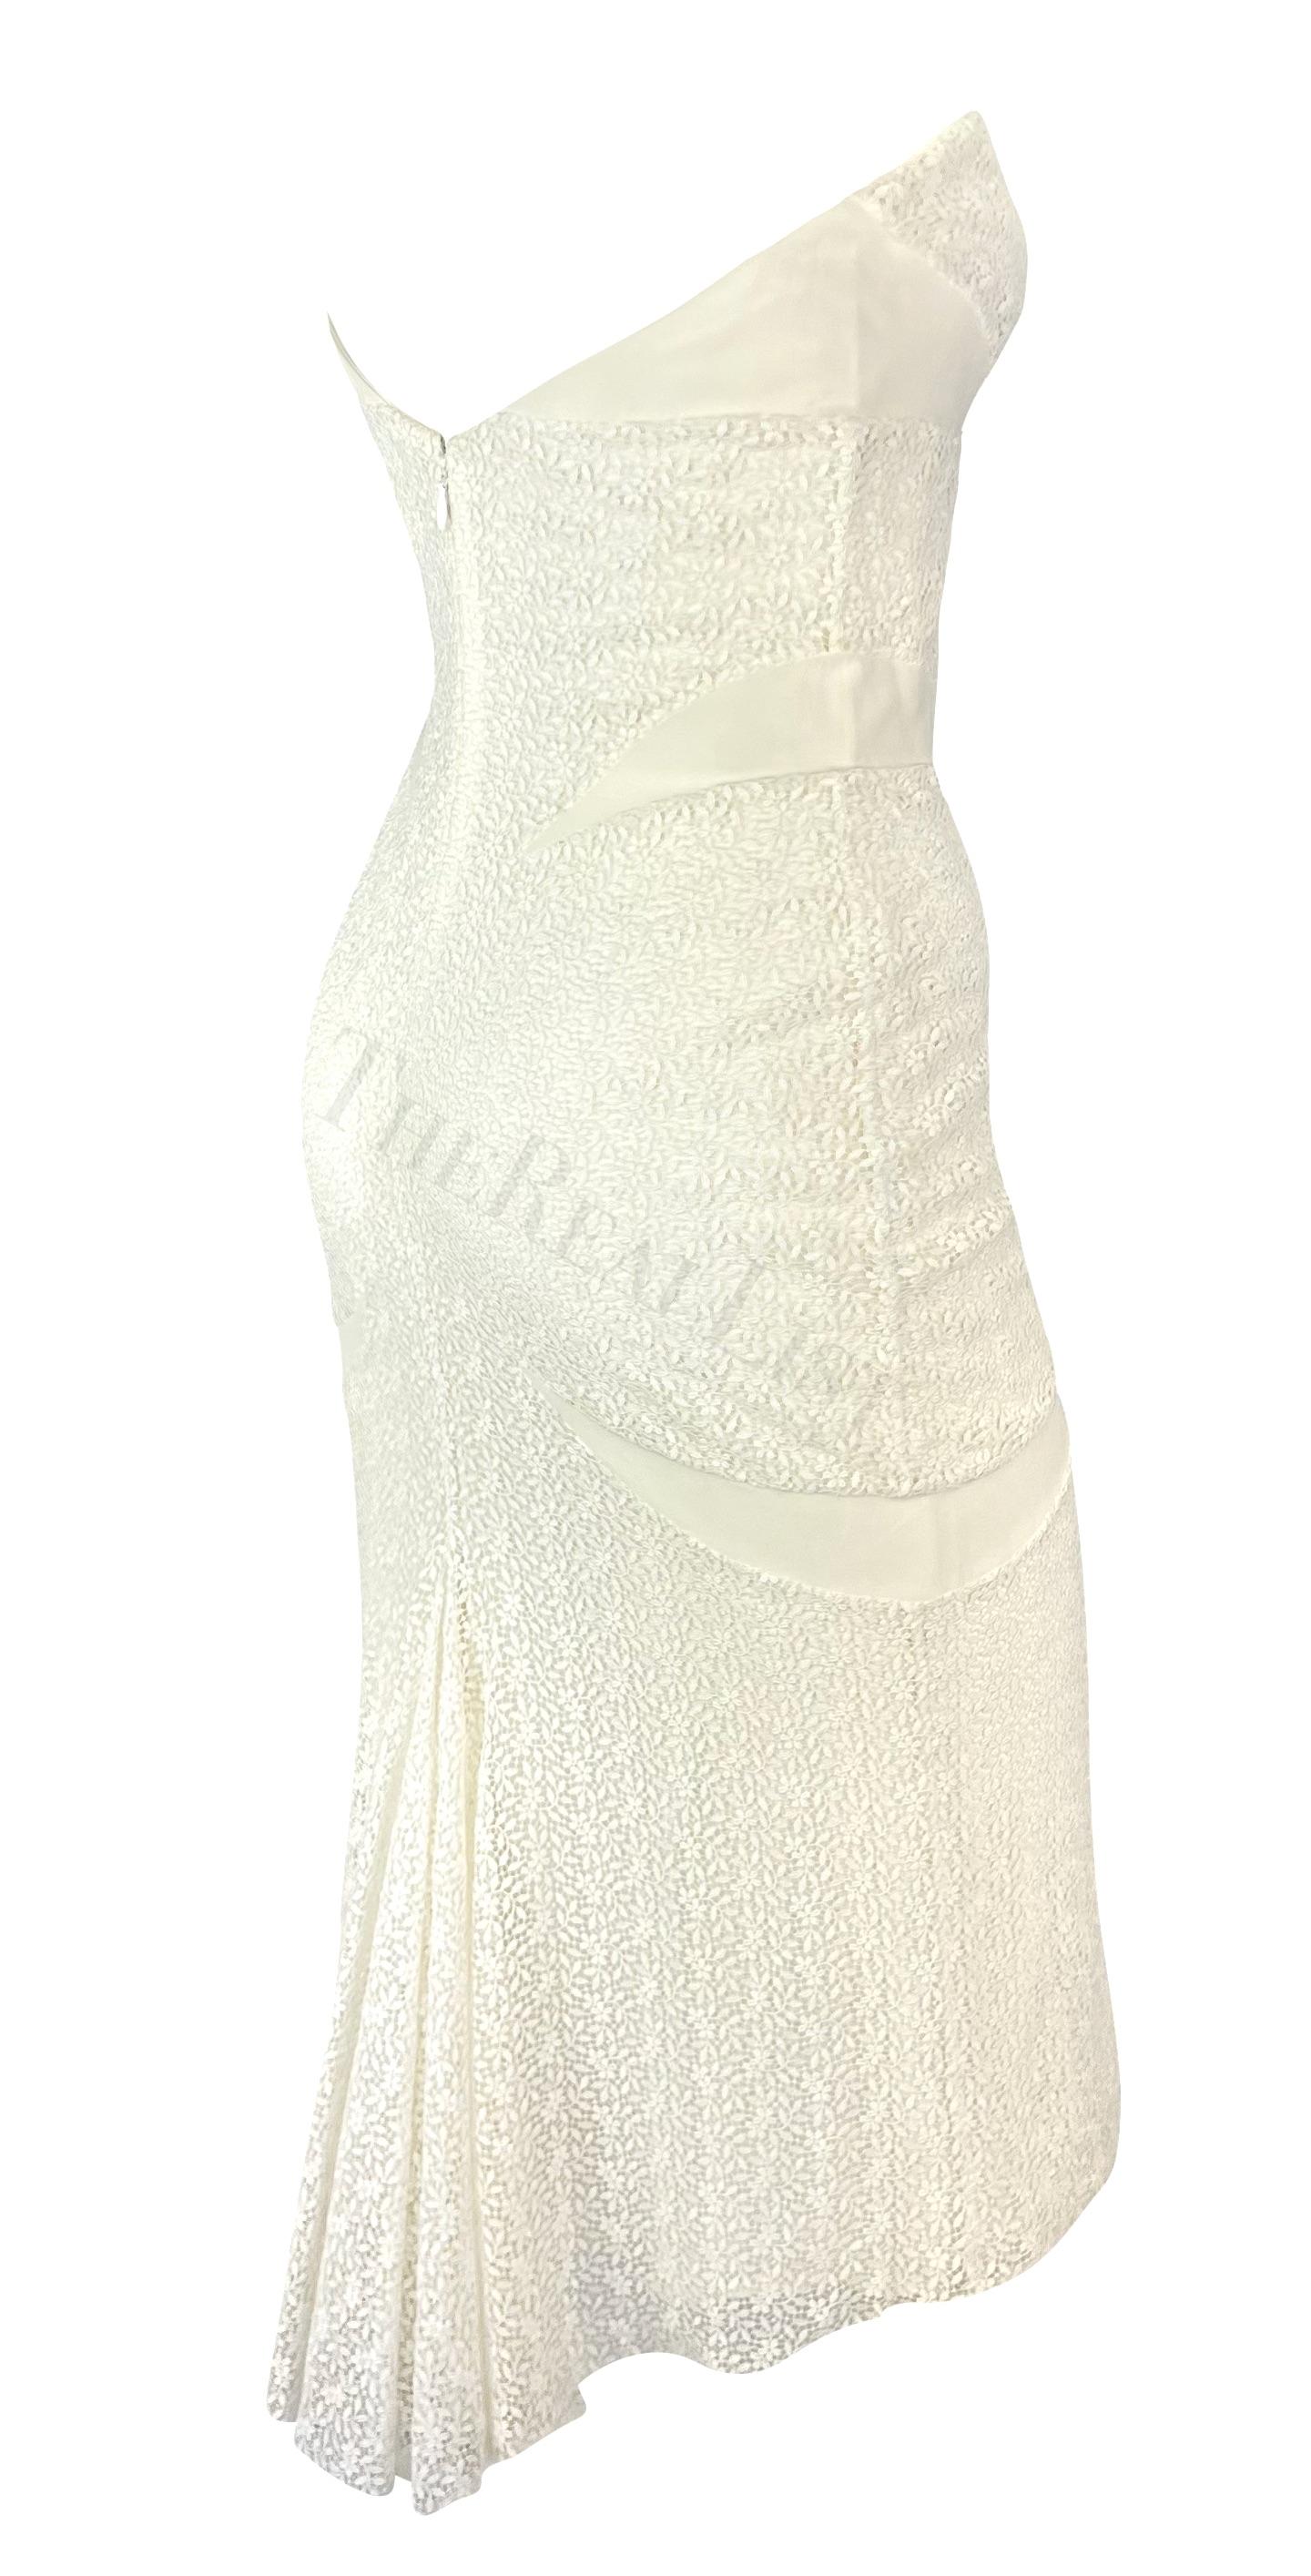 NWT S/S 2002 Gianni Versace by Donatella White Floral Lace Strapless Dress For Sale 2